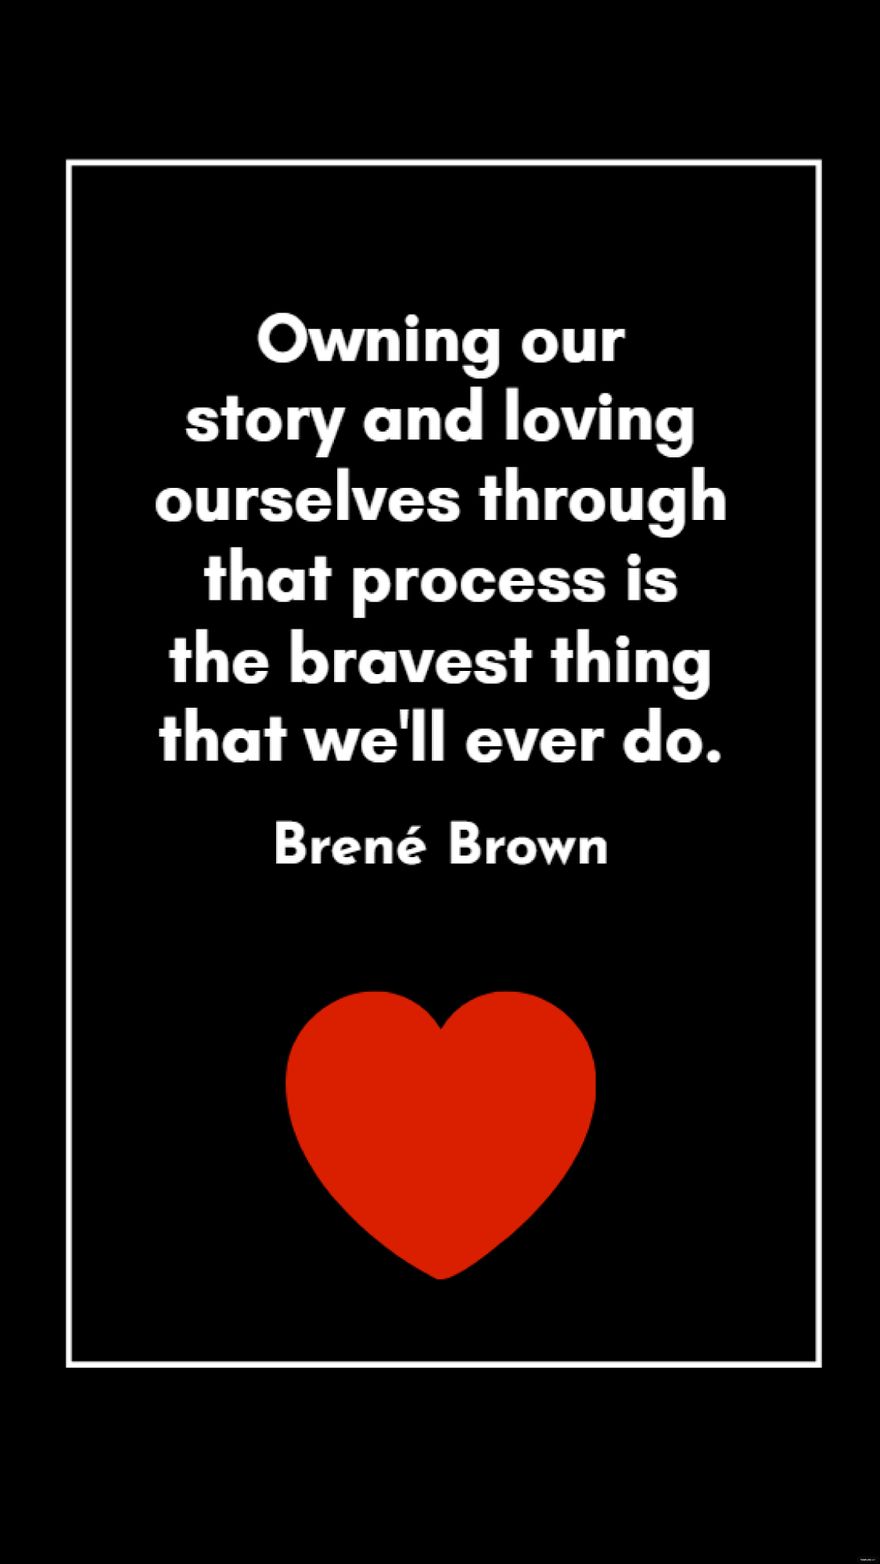 Brené Brown - Owning our story and loving ourselves through that process is the bravest thing that we'll ever do. in JPG